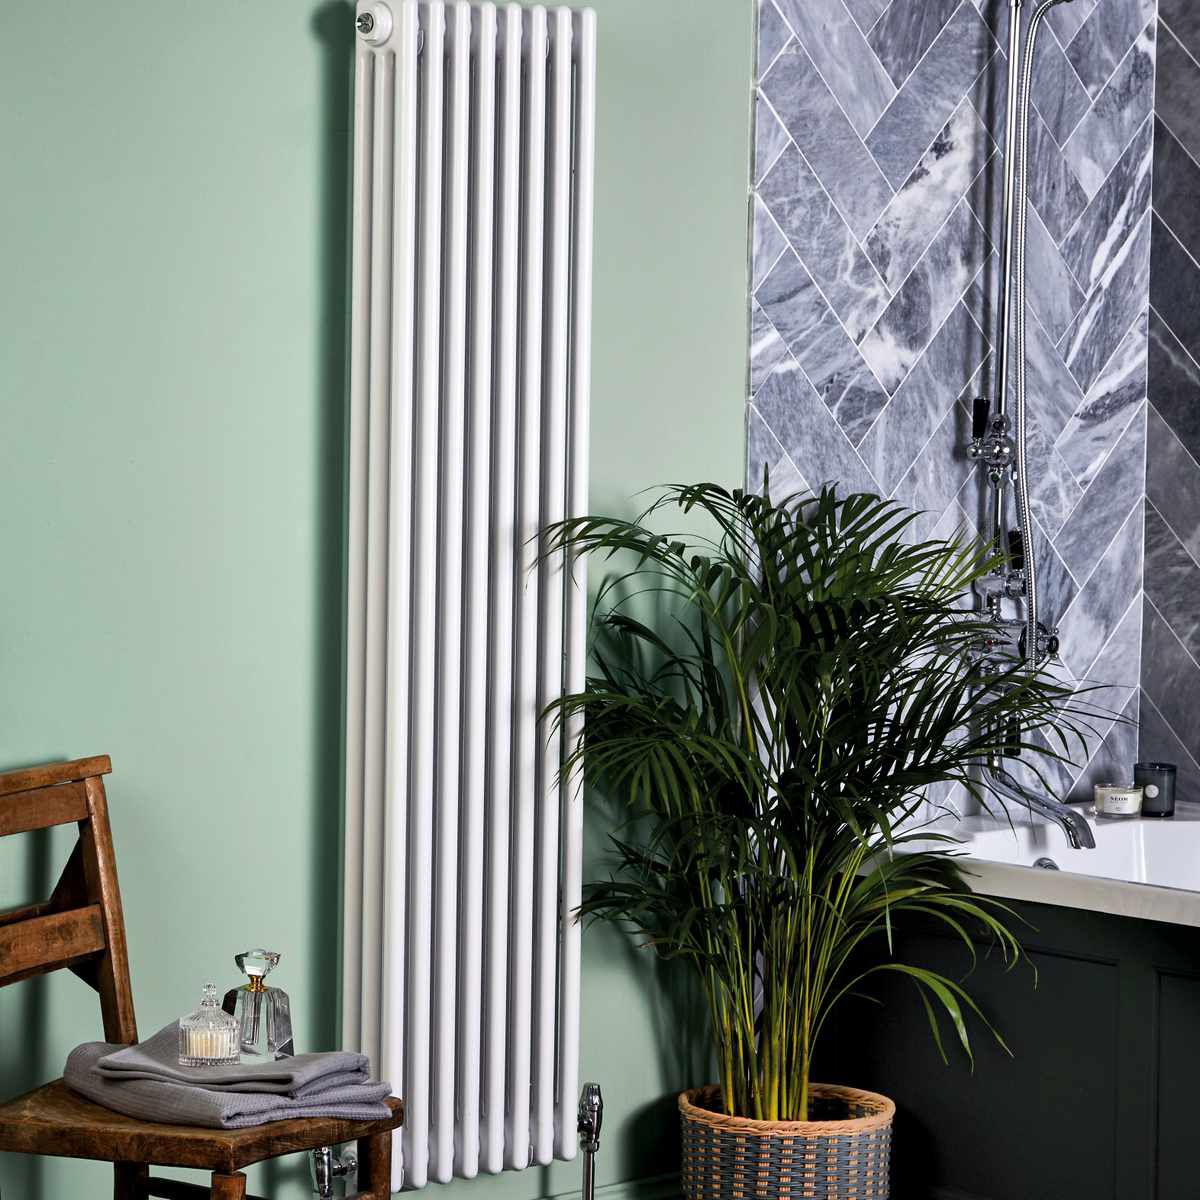 picture of a traditional bathroom radiator